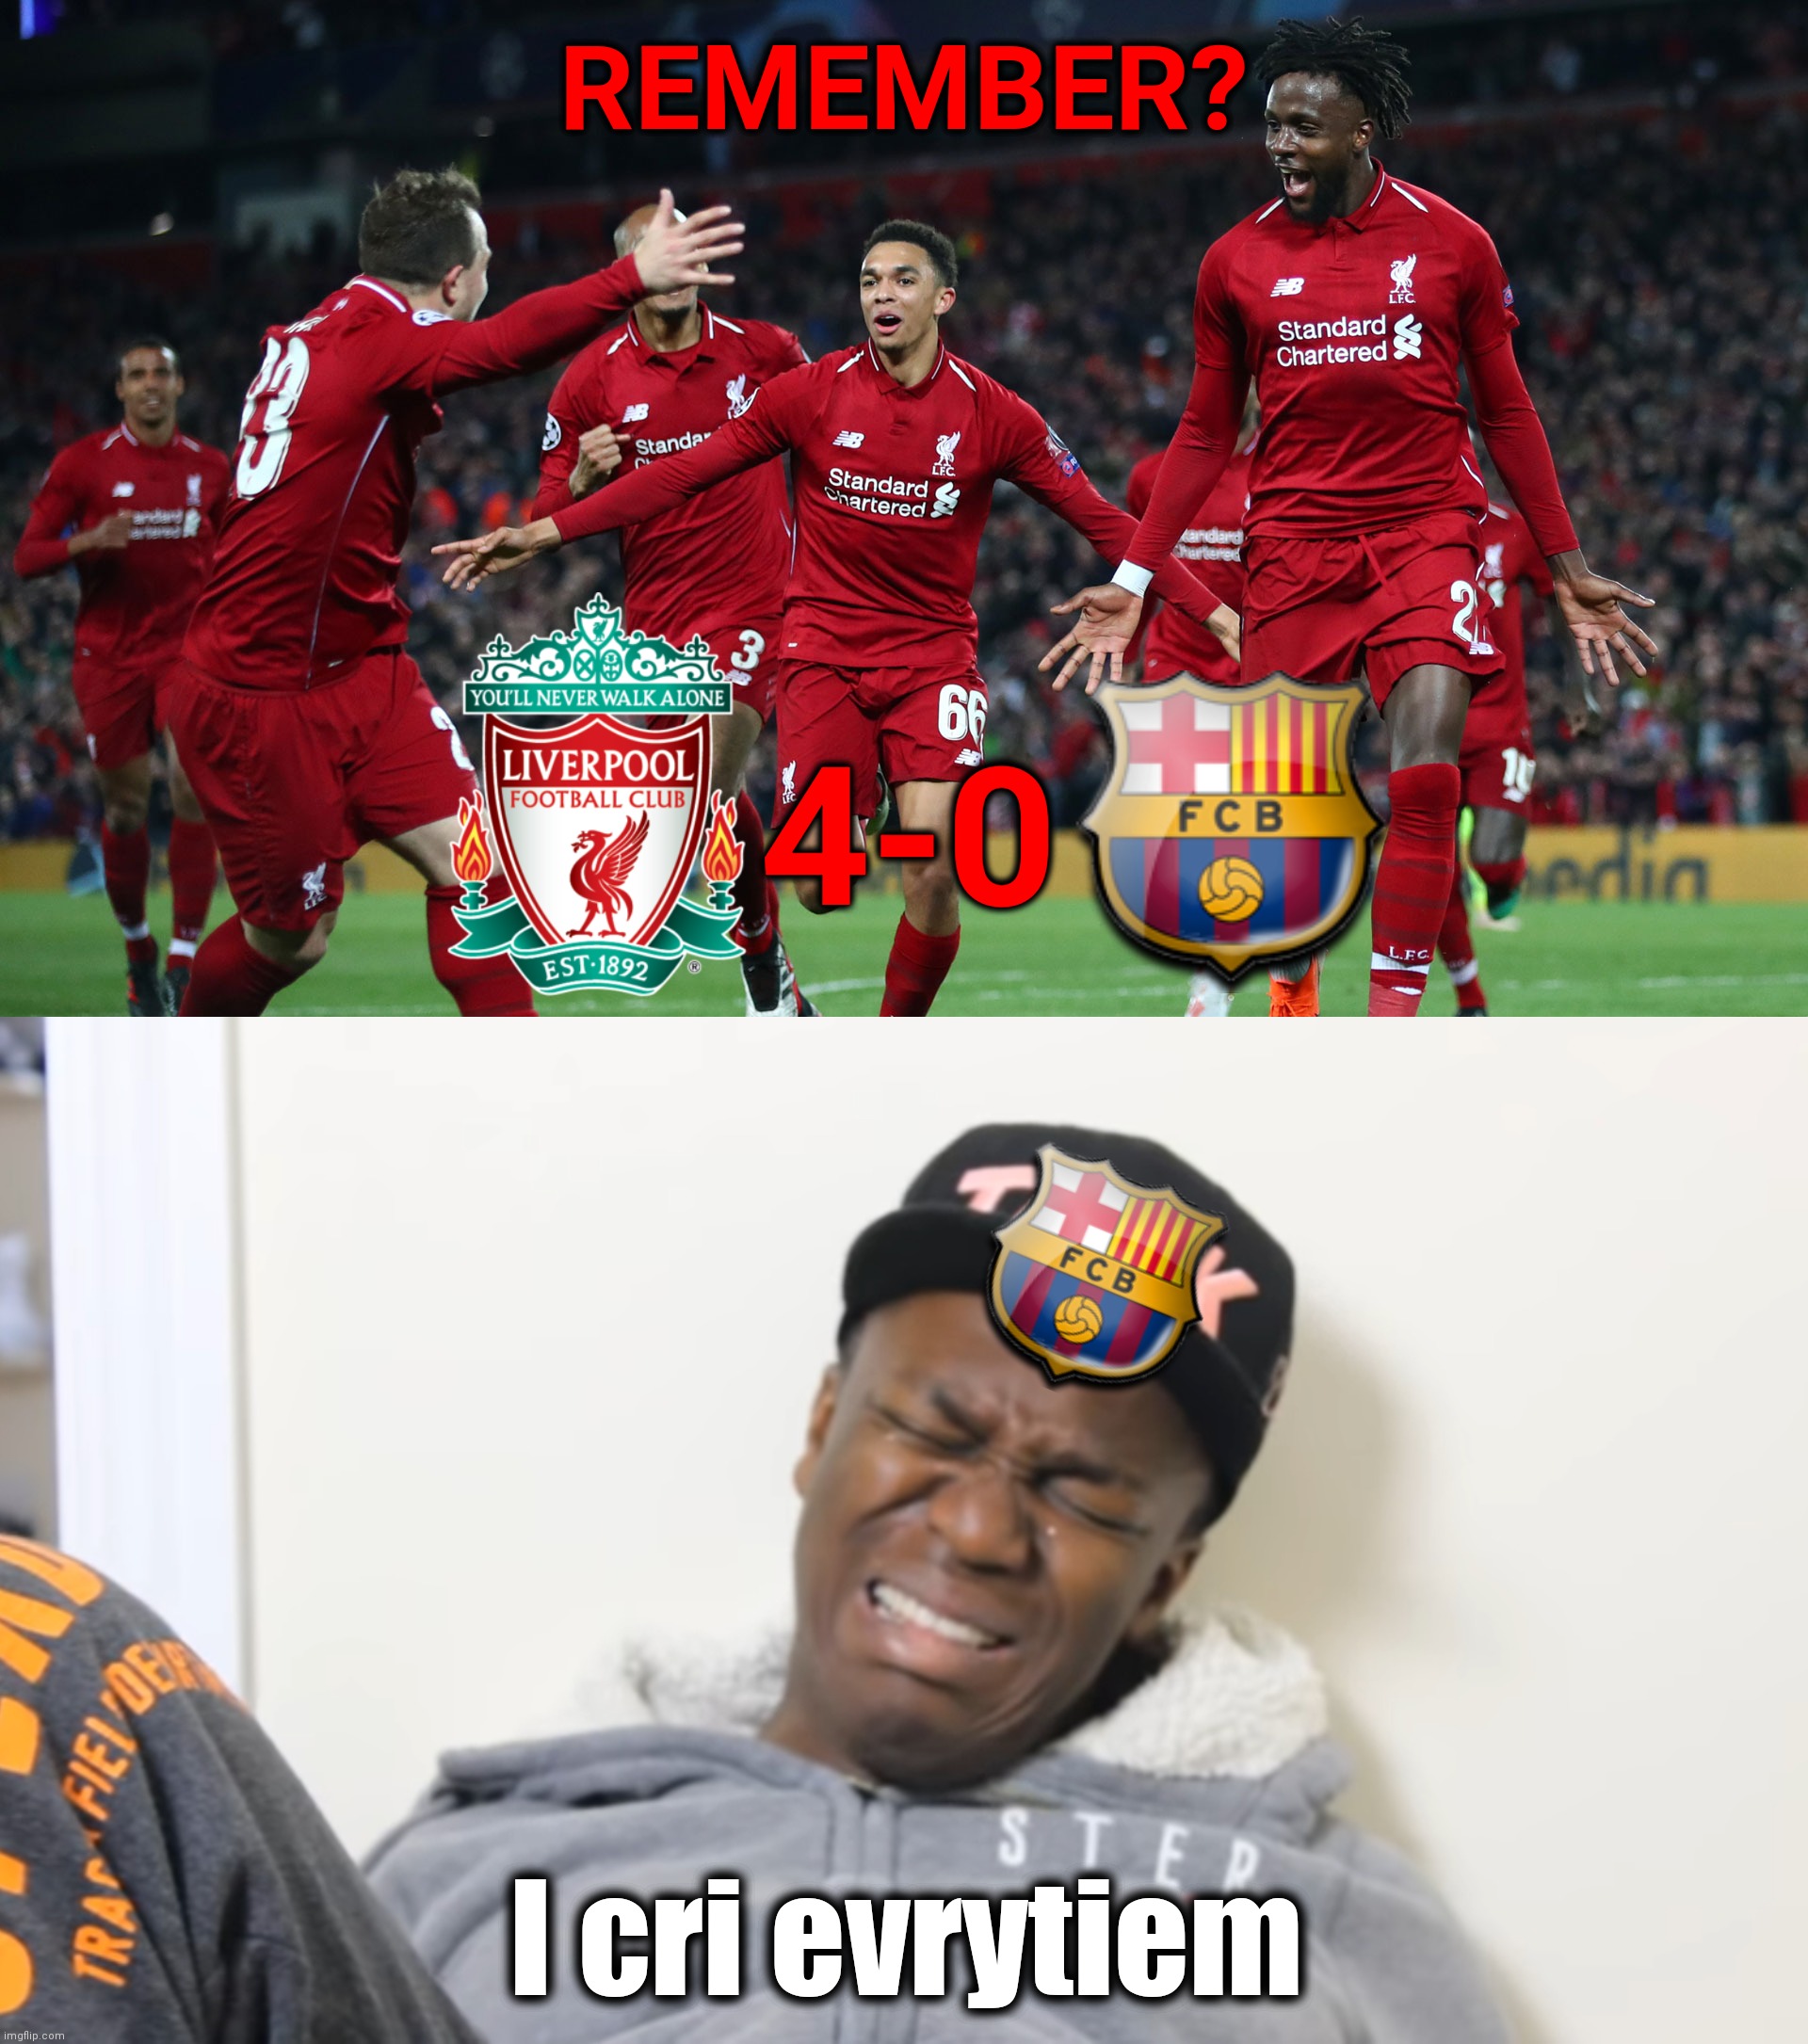 1 year ago... Liverpool 4-0 Barcelona | REMEMBER? 4-0; I cri evrytiem | image tagged in memes,football,soccer,barcelona,liverpool,champions league | made w/ Imgflip meme maker